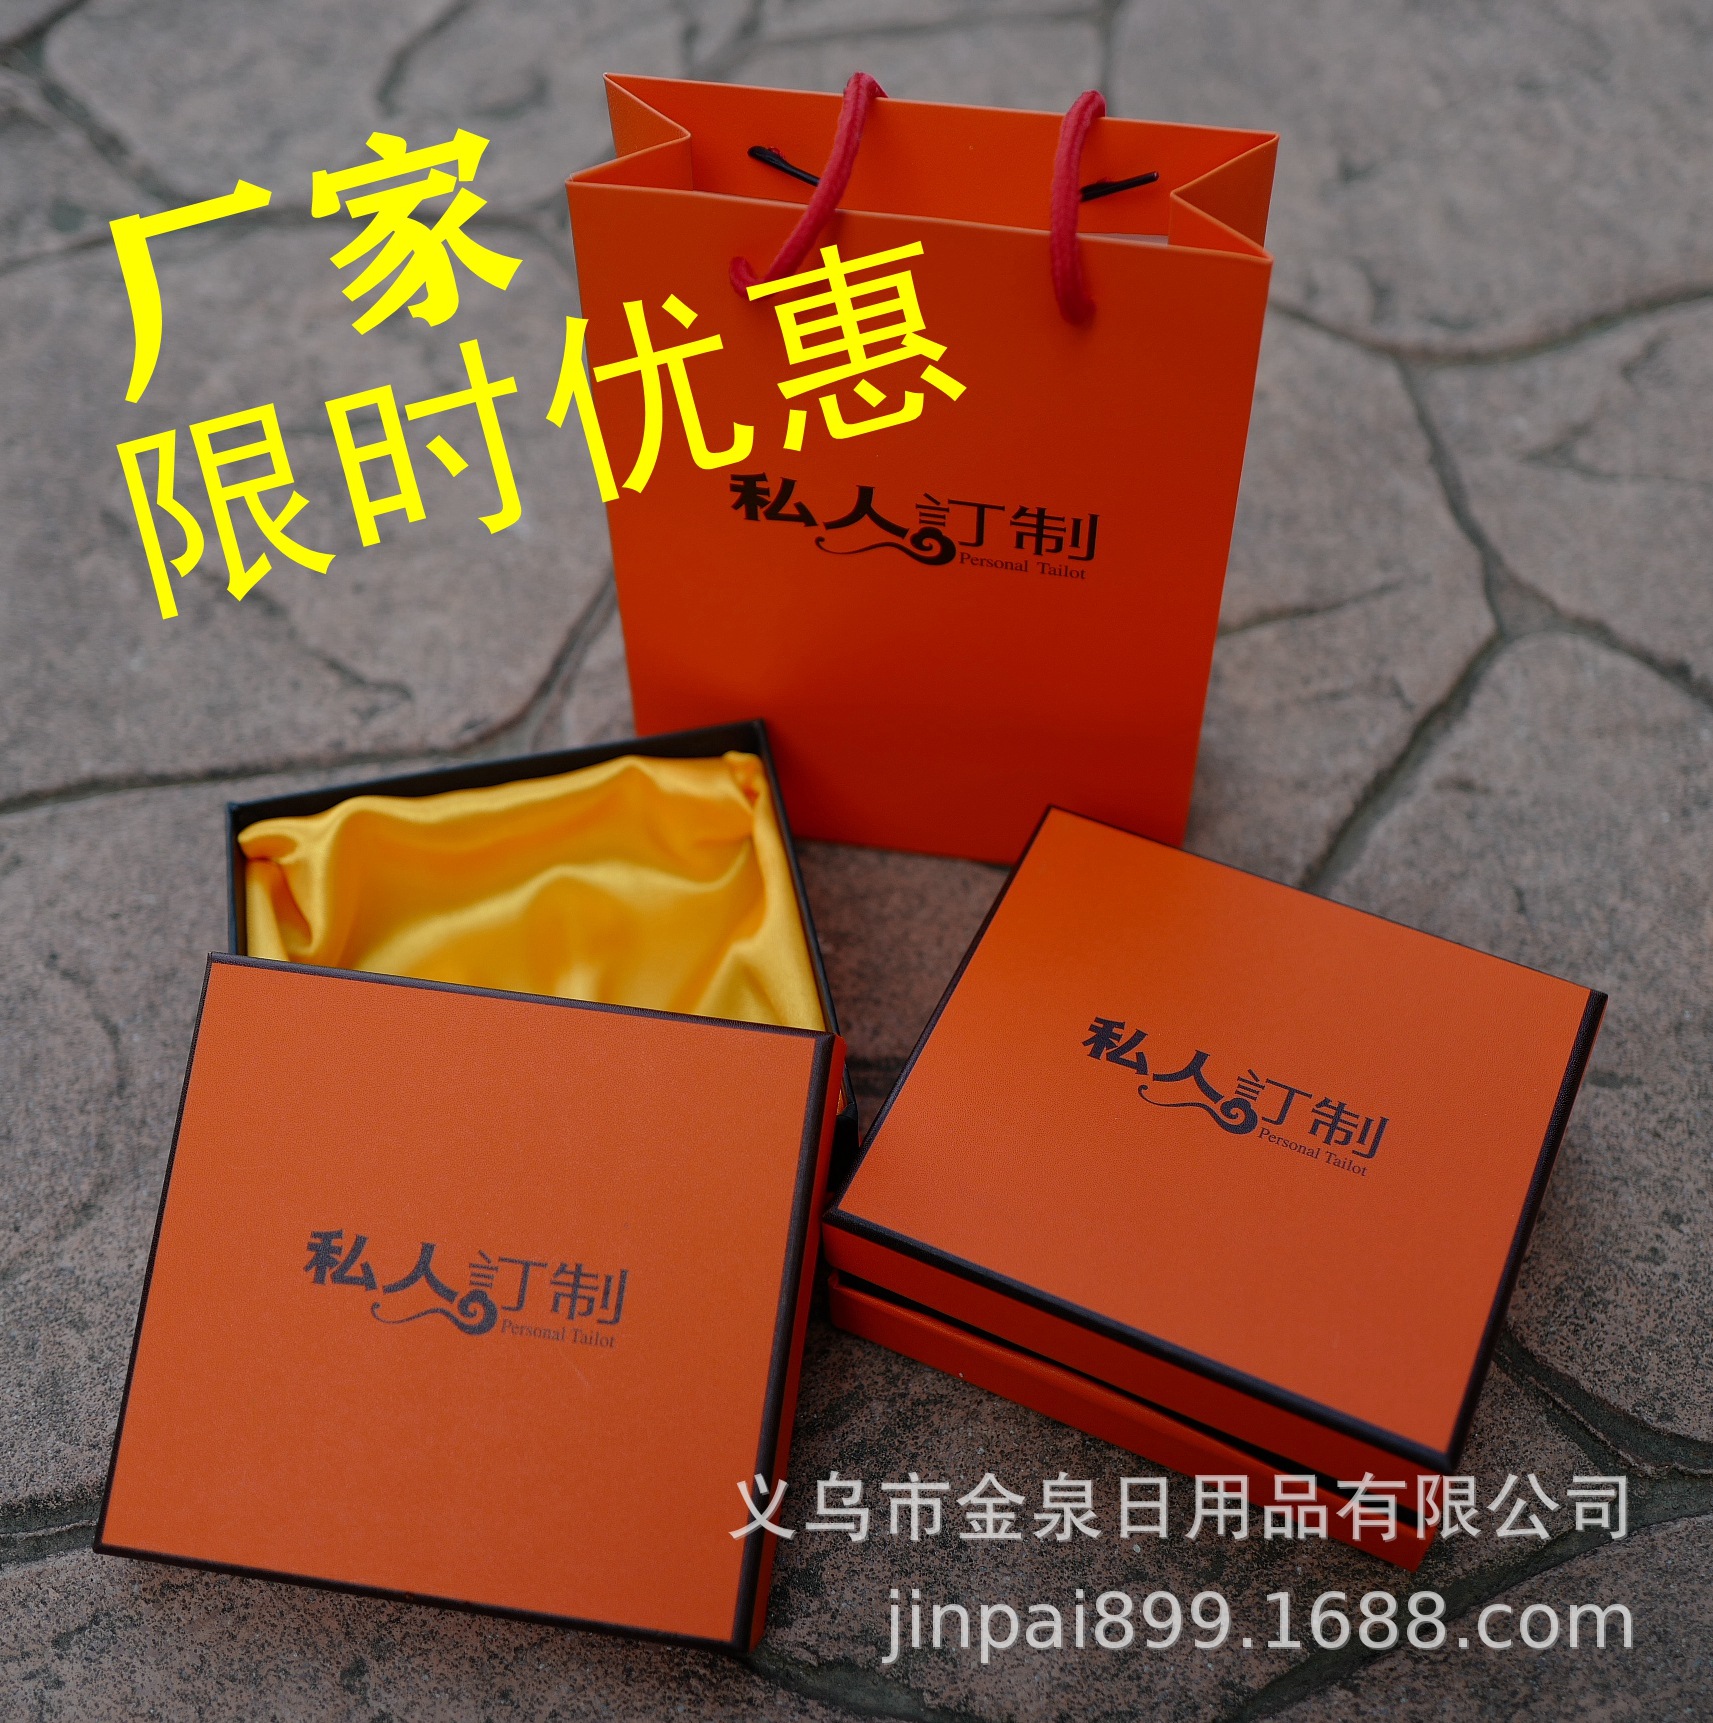 Manufacturers make packaging boxes, gift...